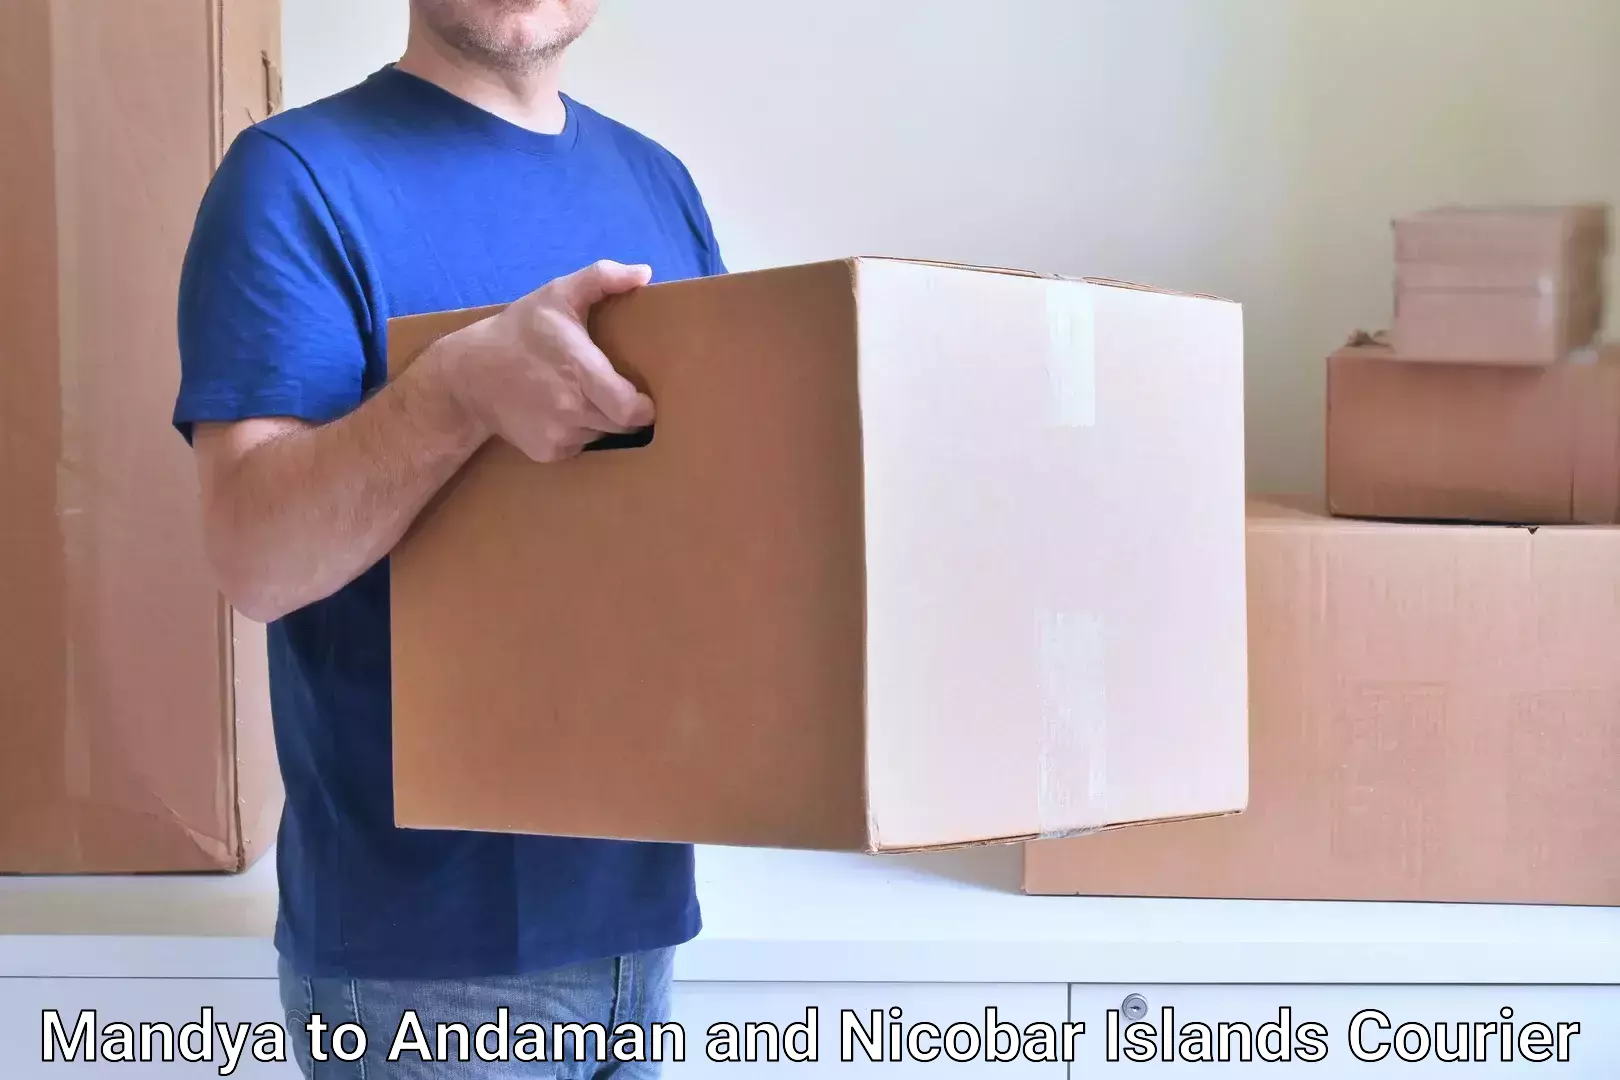 Speedy delivery service in Mandya to North And Middle Andaman